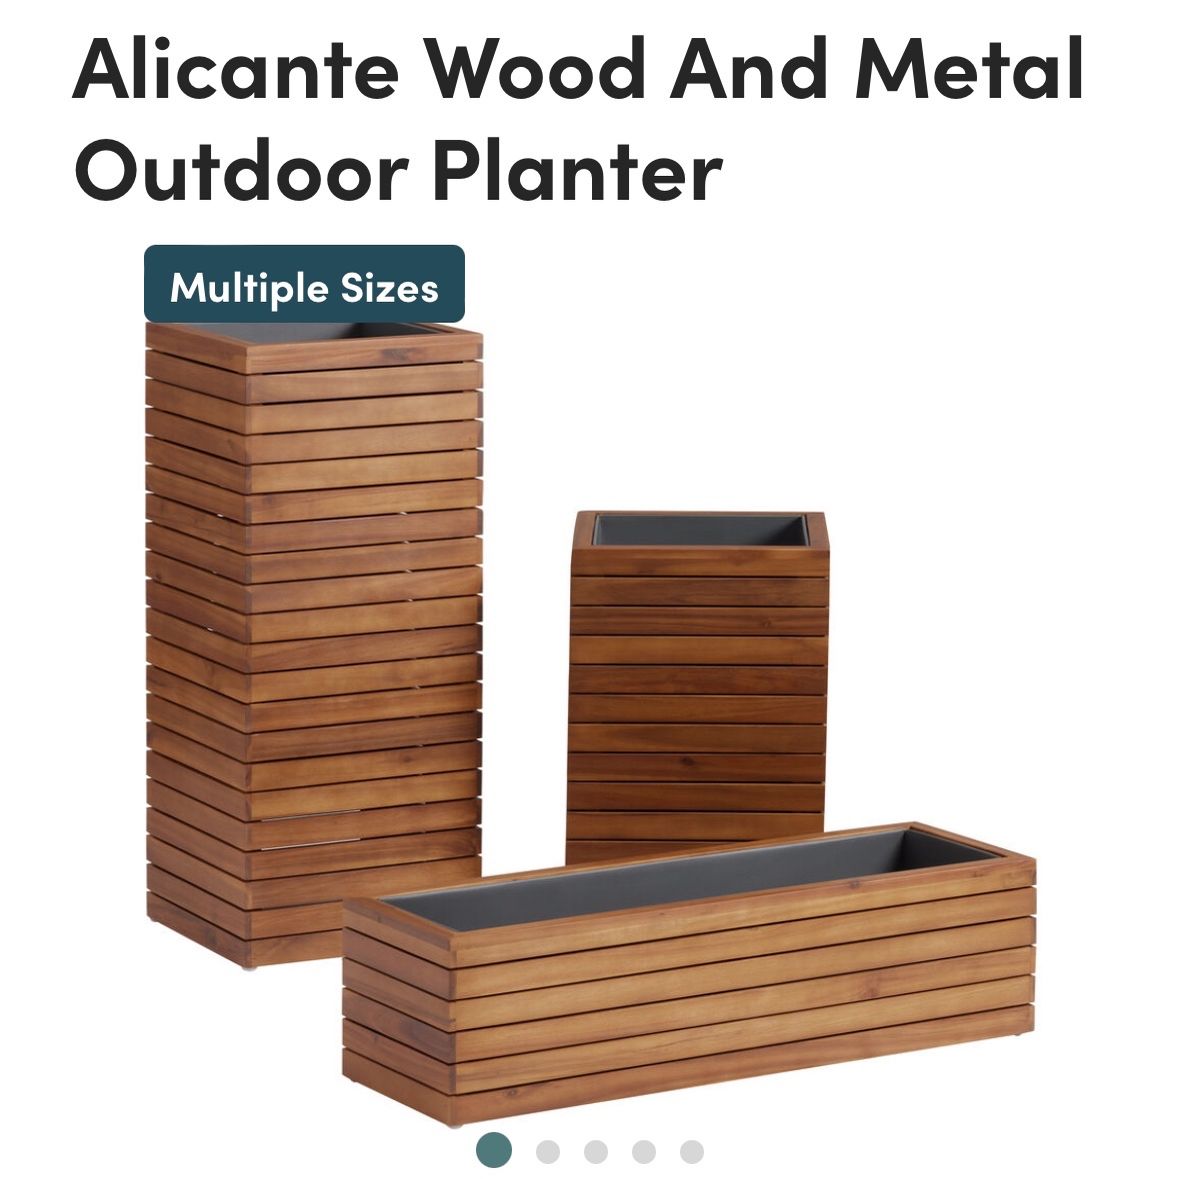 SMALL Alicante Wood And Metal Outdoor Planter - (Brand New In box)